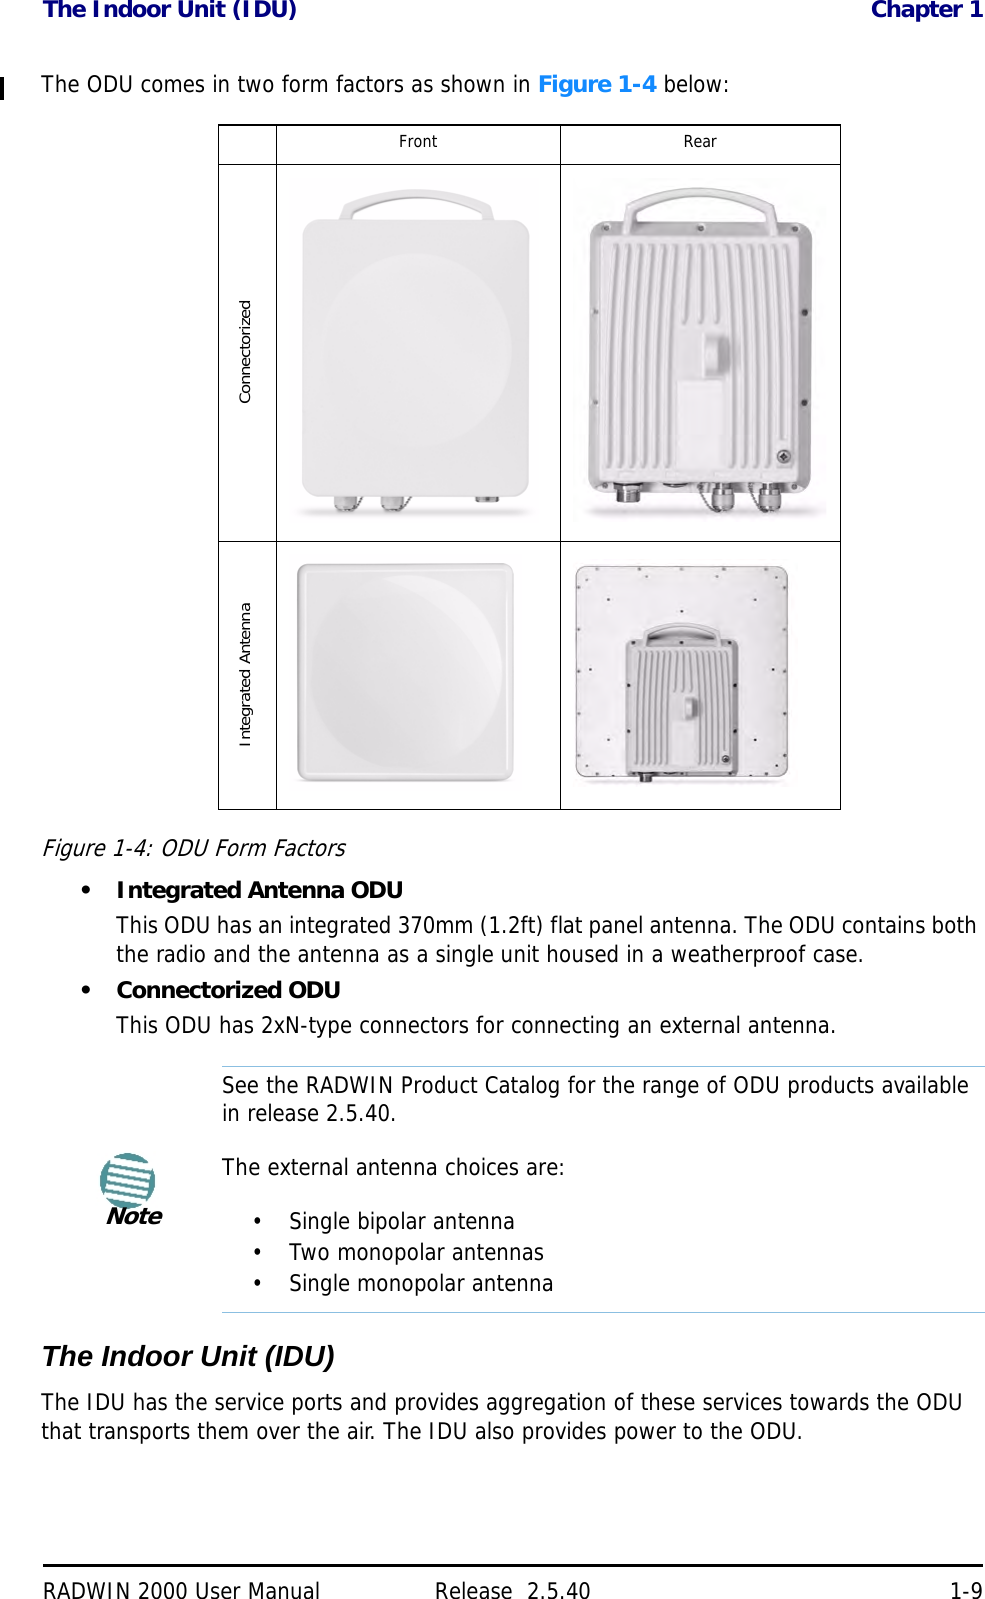 The Indoor Unit (IDU) Chapter 1RADWIN 2000 User Manual Release  2.5.40 1-9The ODU comes in two form factors as shown in Figure 1-4 below:Figure 1-4: ODU Form Factors• Integrated Antenna ODUThis ODU has an integrated 370mm (1.2ft) flat panel antenna. The ODU contains both the radio and the antenna as a single unit housed in a weatherproof case.• Connectorized ODUThis ODU has 2xN-type connectors for connecting an external antenna.The Indoor Unit (IDU)The IDU has the service ports and provides aggregation of these services towards the ODU that transports them over the air. The IDU also provides power to the ODU.Front RearConnectorizedIntegrated AntennaNoteSee the RADWIN Product Catalog for the range of ODU products available in release 2.5.40.The external antenna choices are:• Single bipolar antenna• Two monopolar antennas• Single monopolar antenna